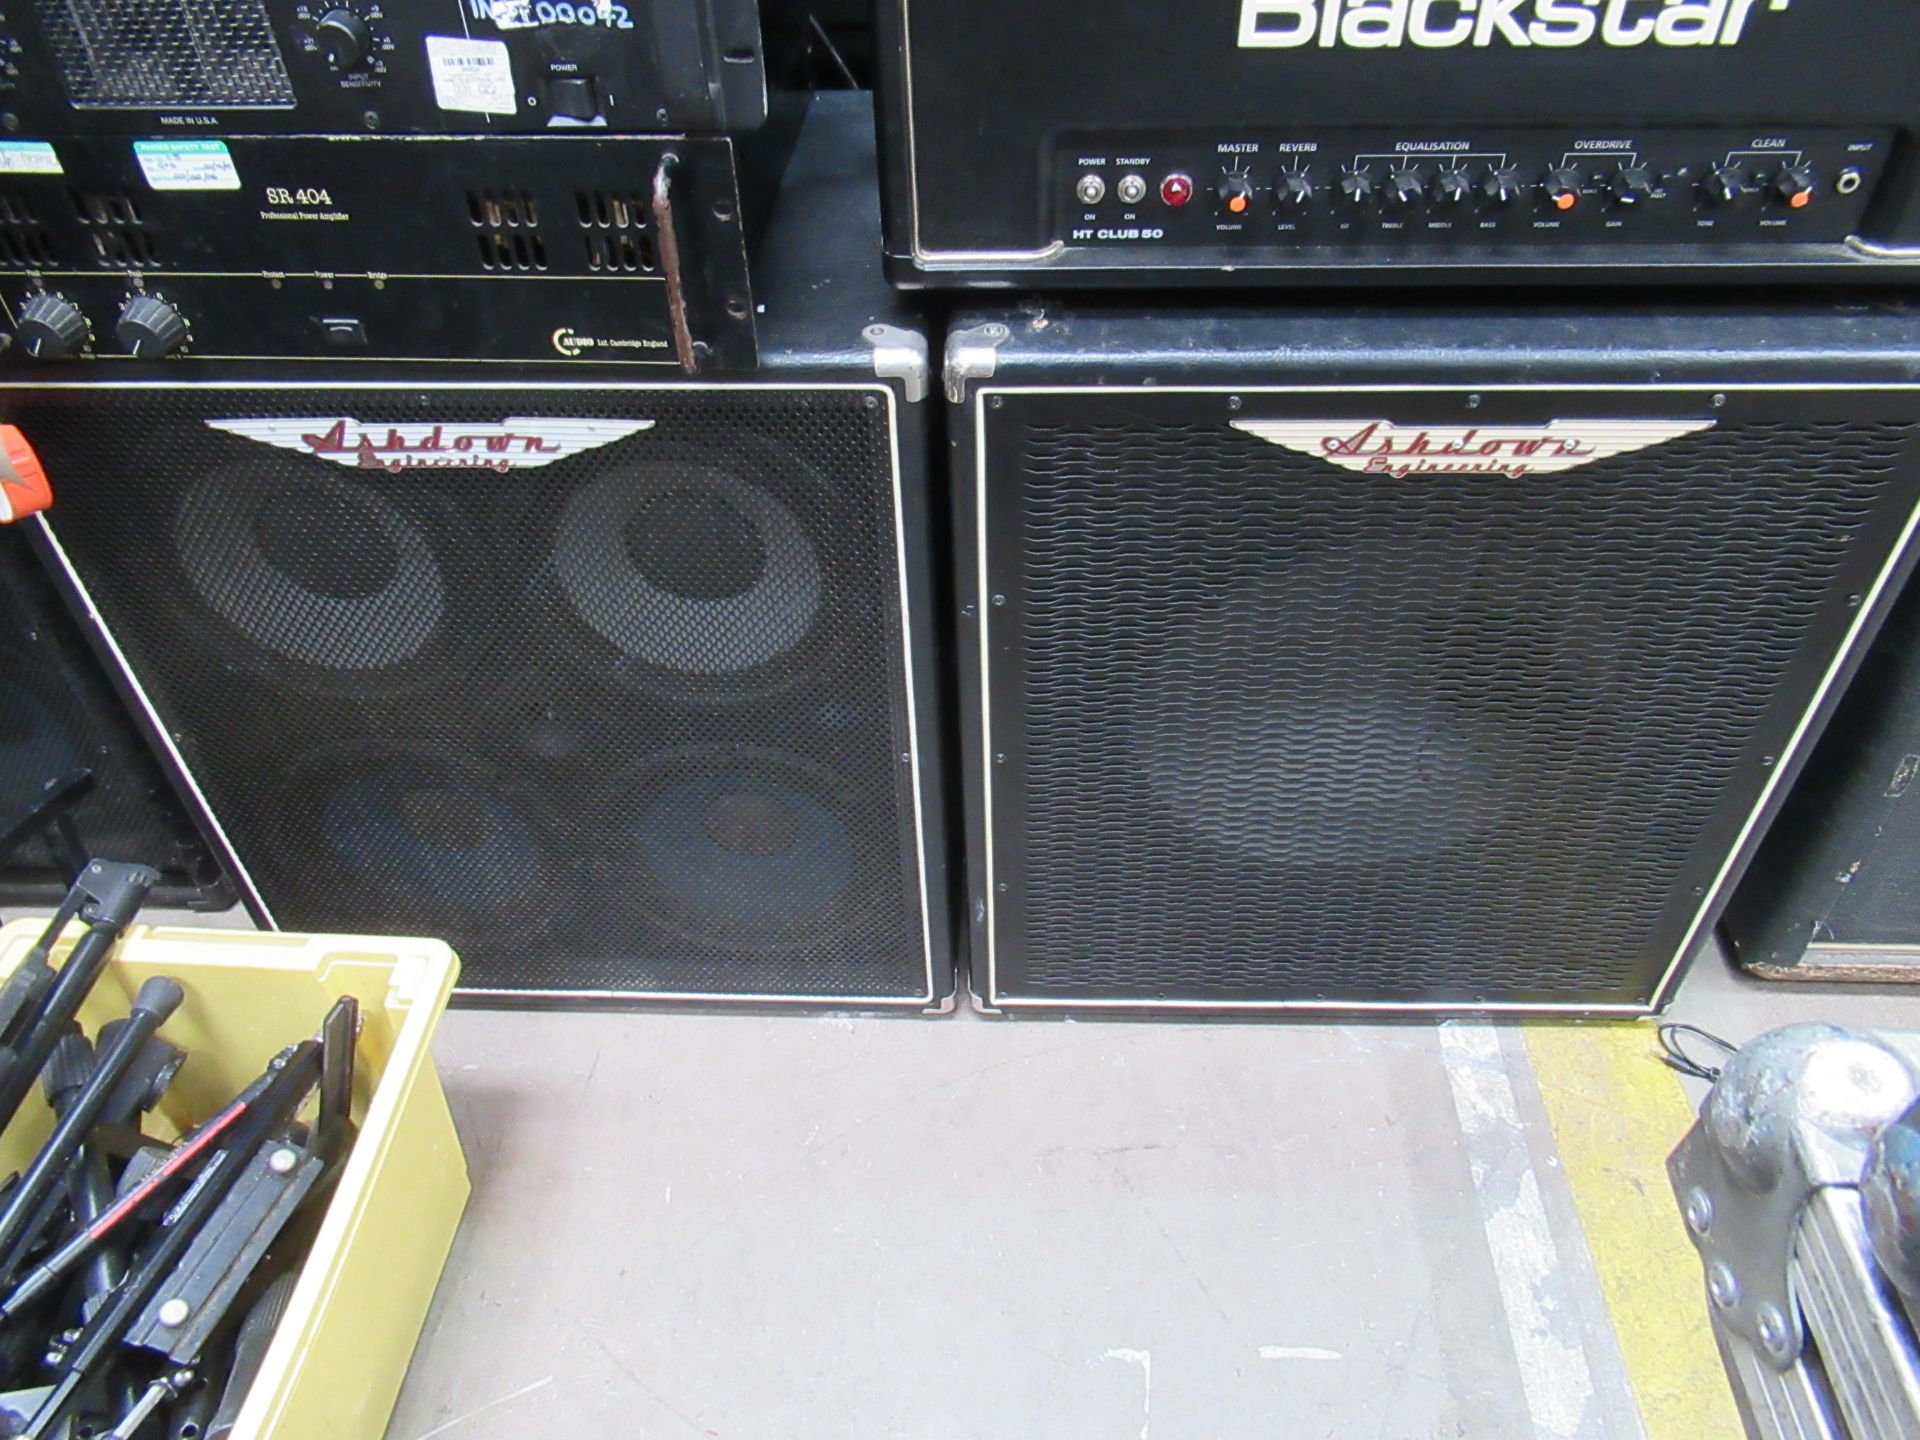 2x Amplifiers (Marshall & Blackstar) and 2x Ashdown Speakers - Image 8 of 11